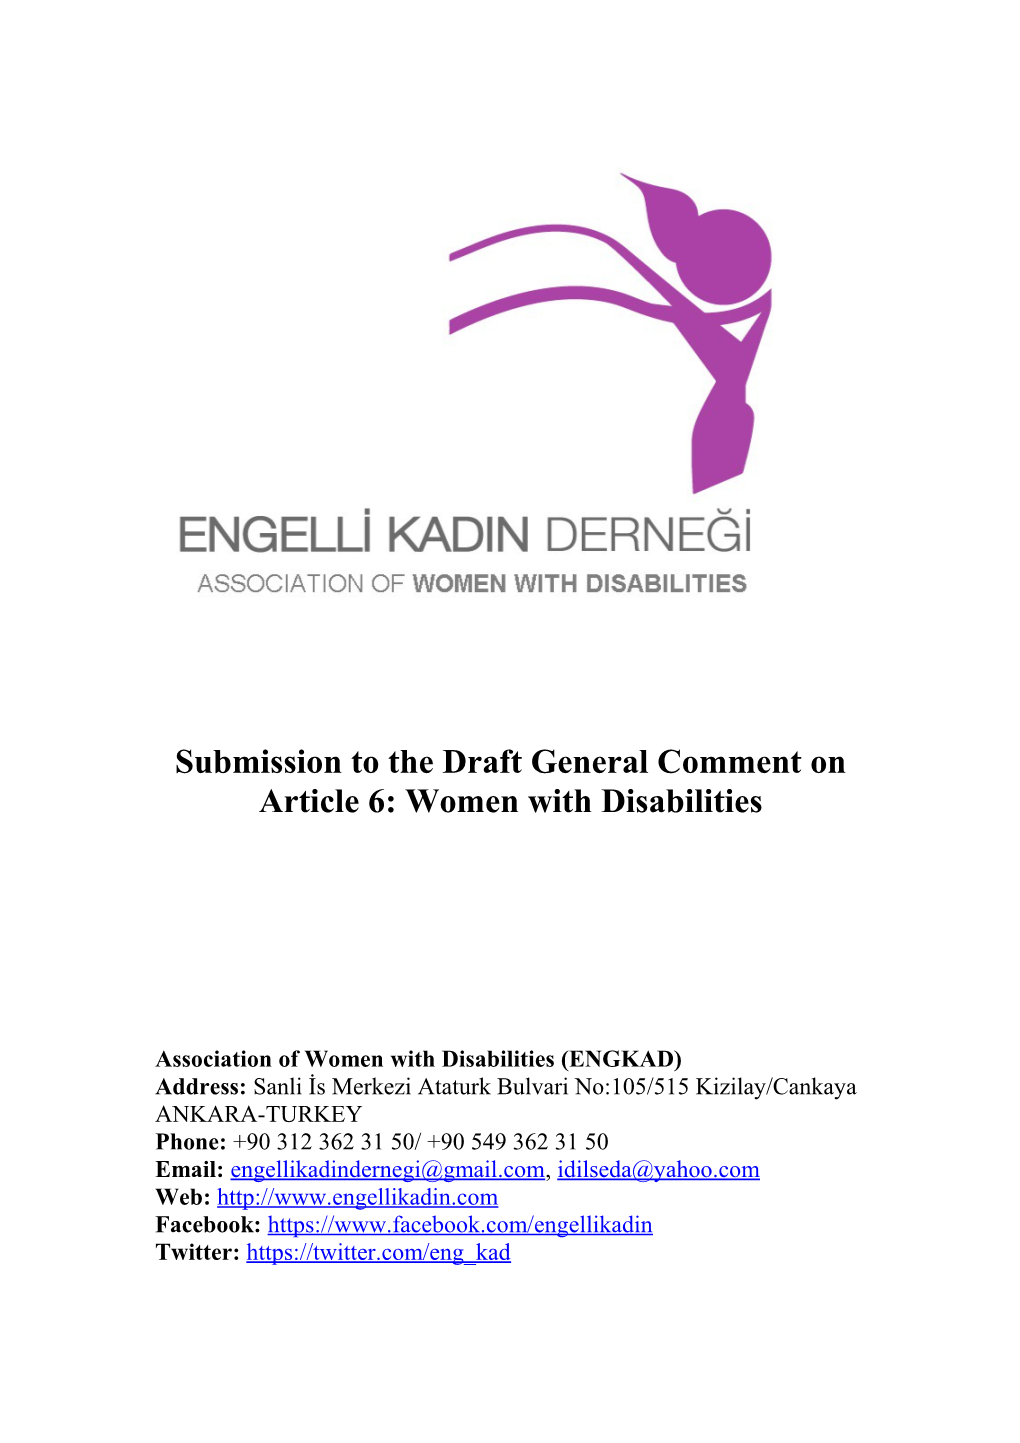 Submission to the Draft General Comment on Article 6: Women with Disabilities